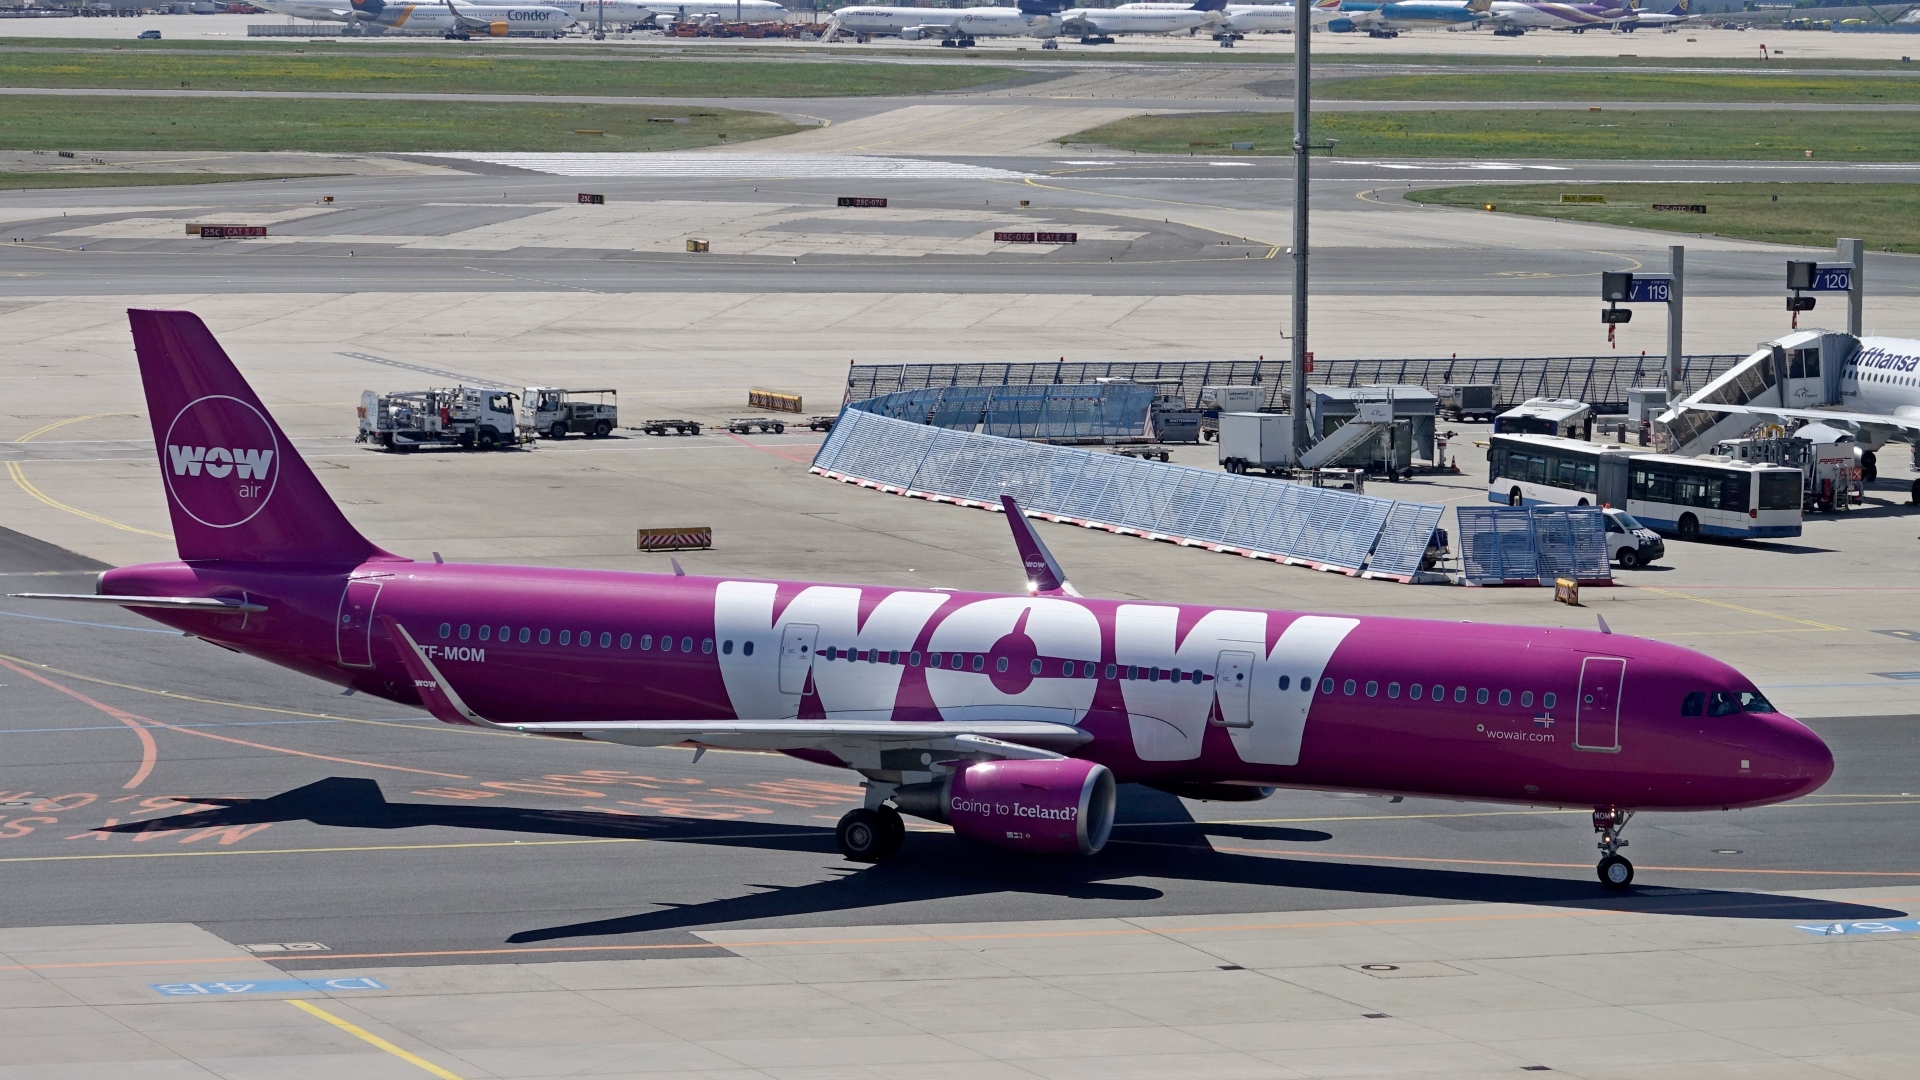 Is Wow Air's reboot going to 'make flying fun again'? - The